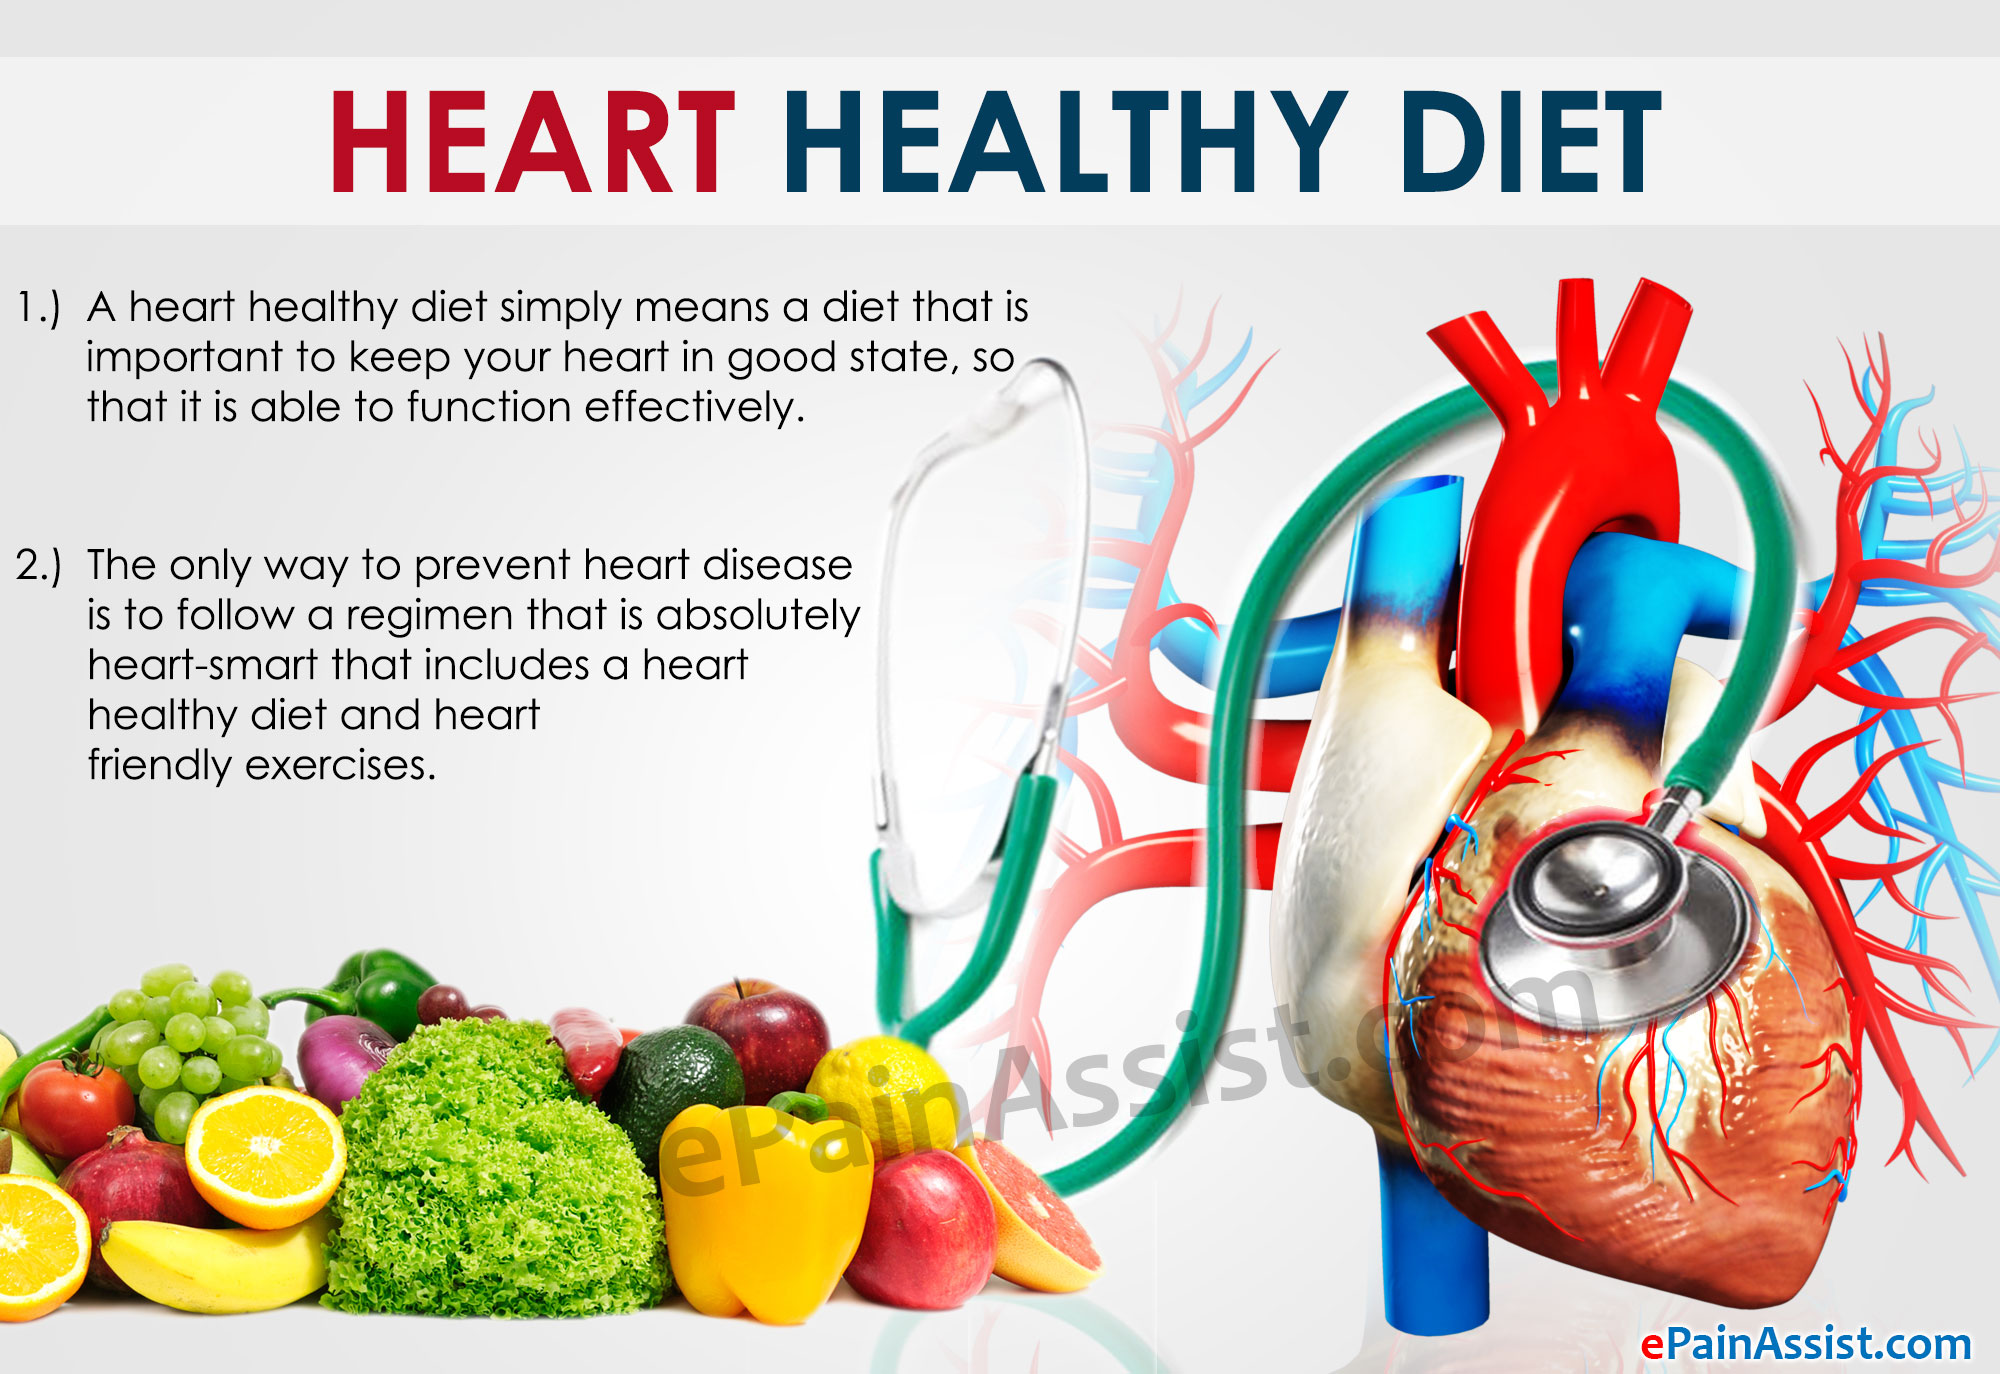 Heart-healthy diets and nutrition